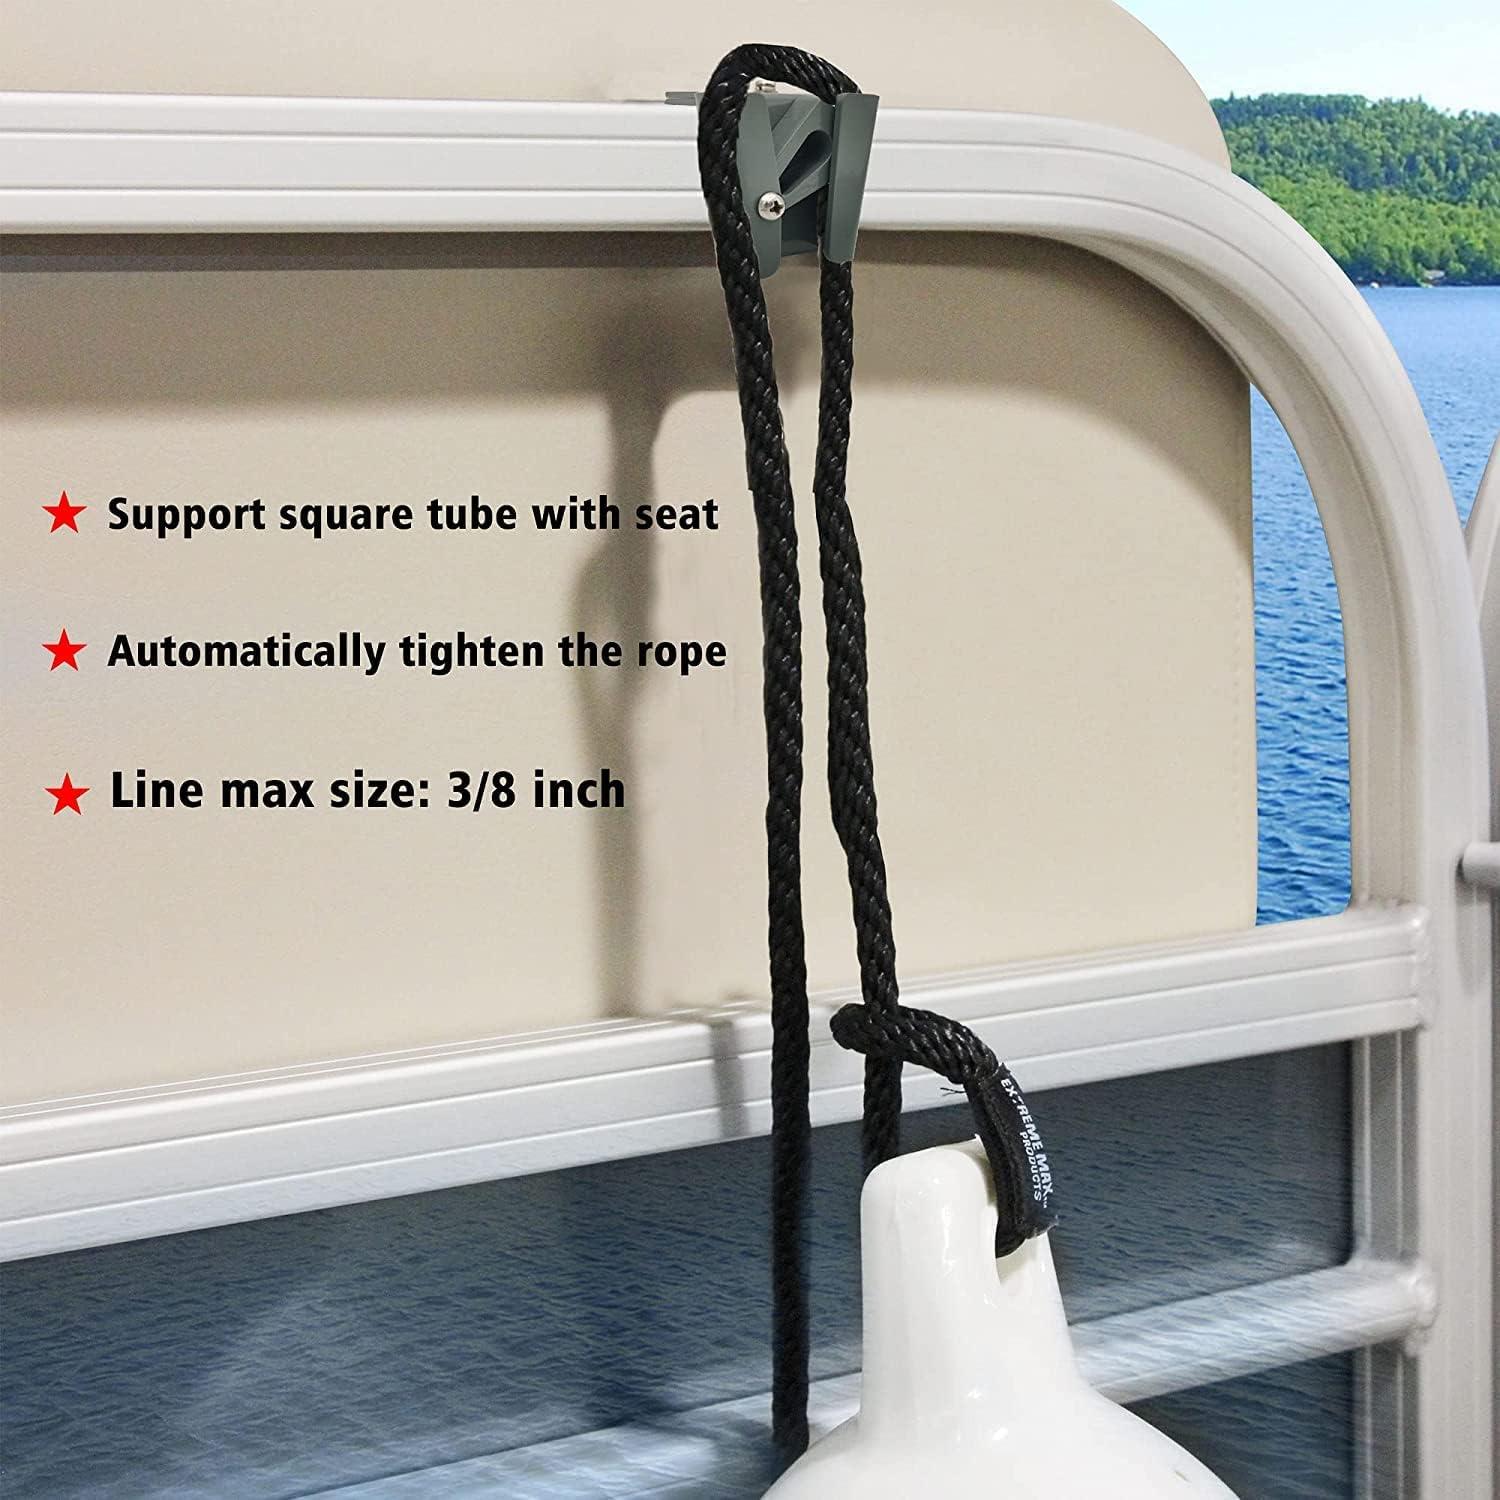 NKEOSN Pontoon Fender Clips with Spring, Boat Fender Clips for